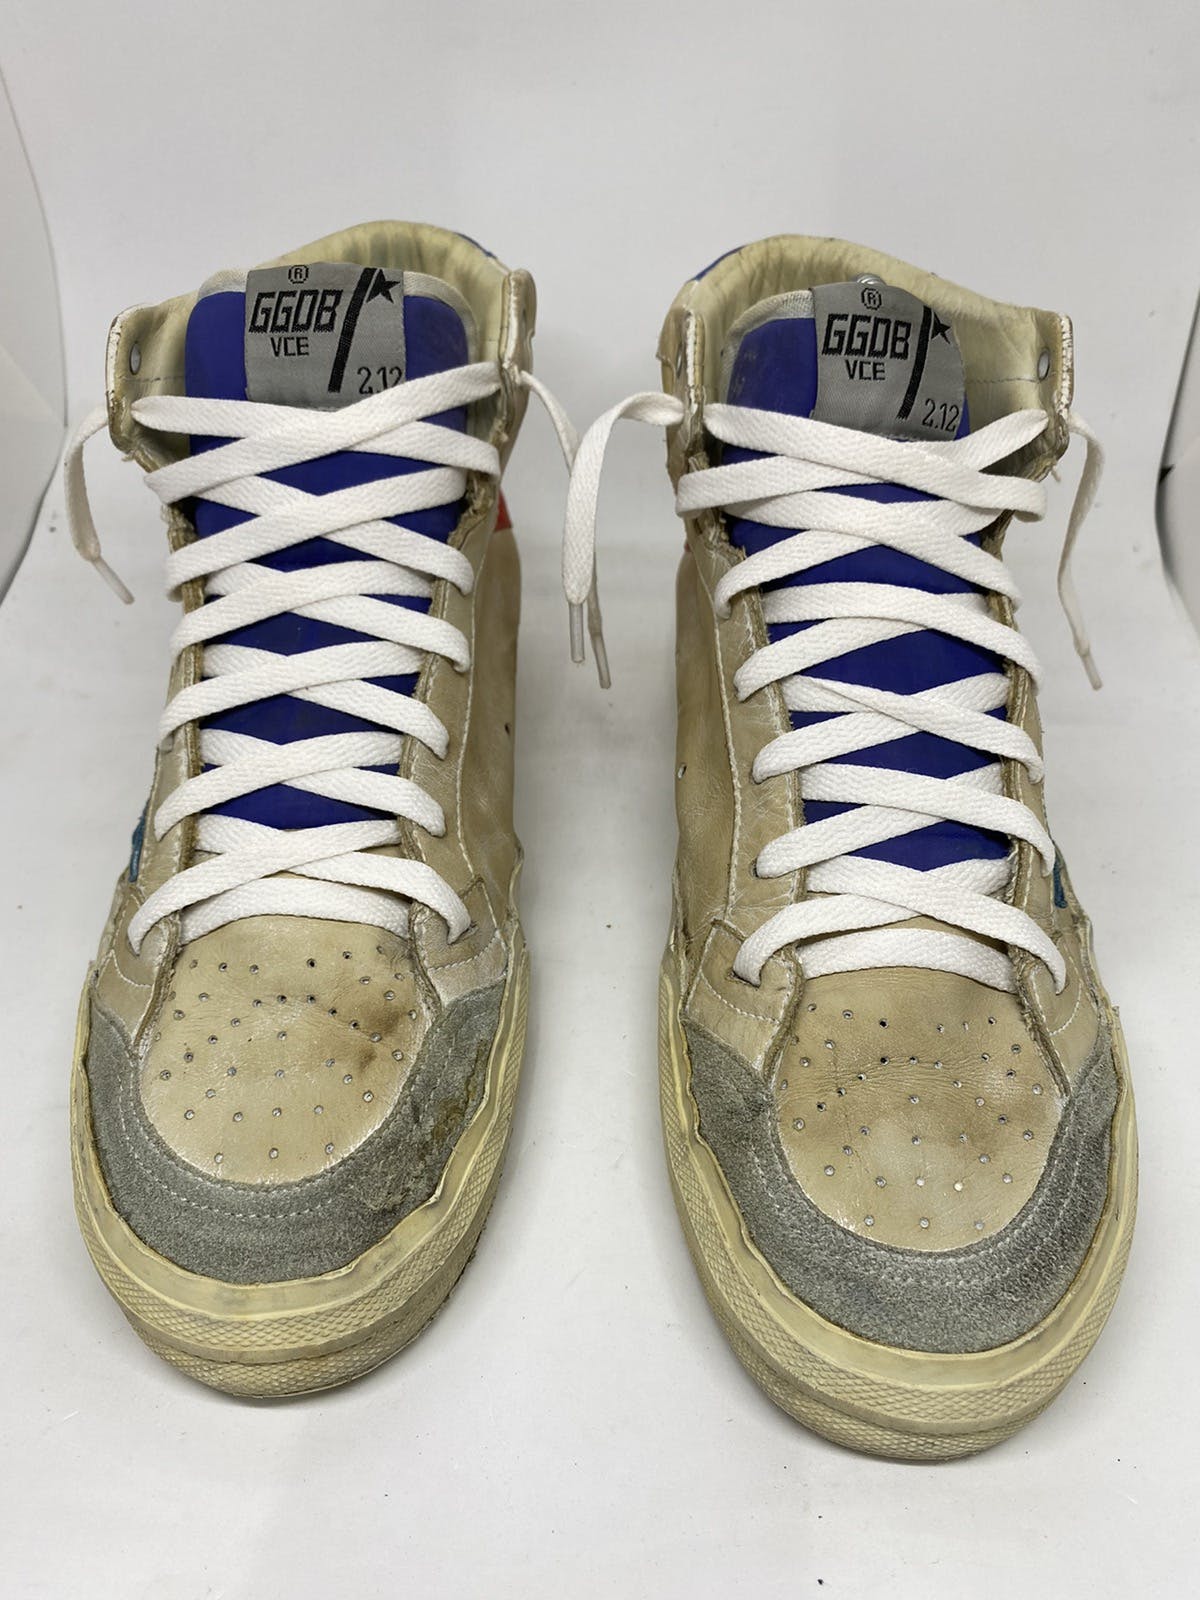 GOLDEN GOOSE vce 2.12 ggdb Sneakers size 41 or us 11 - 3